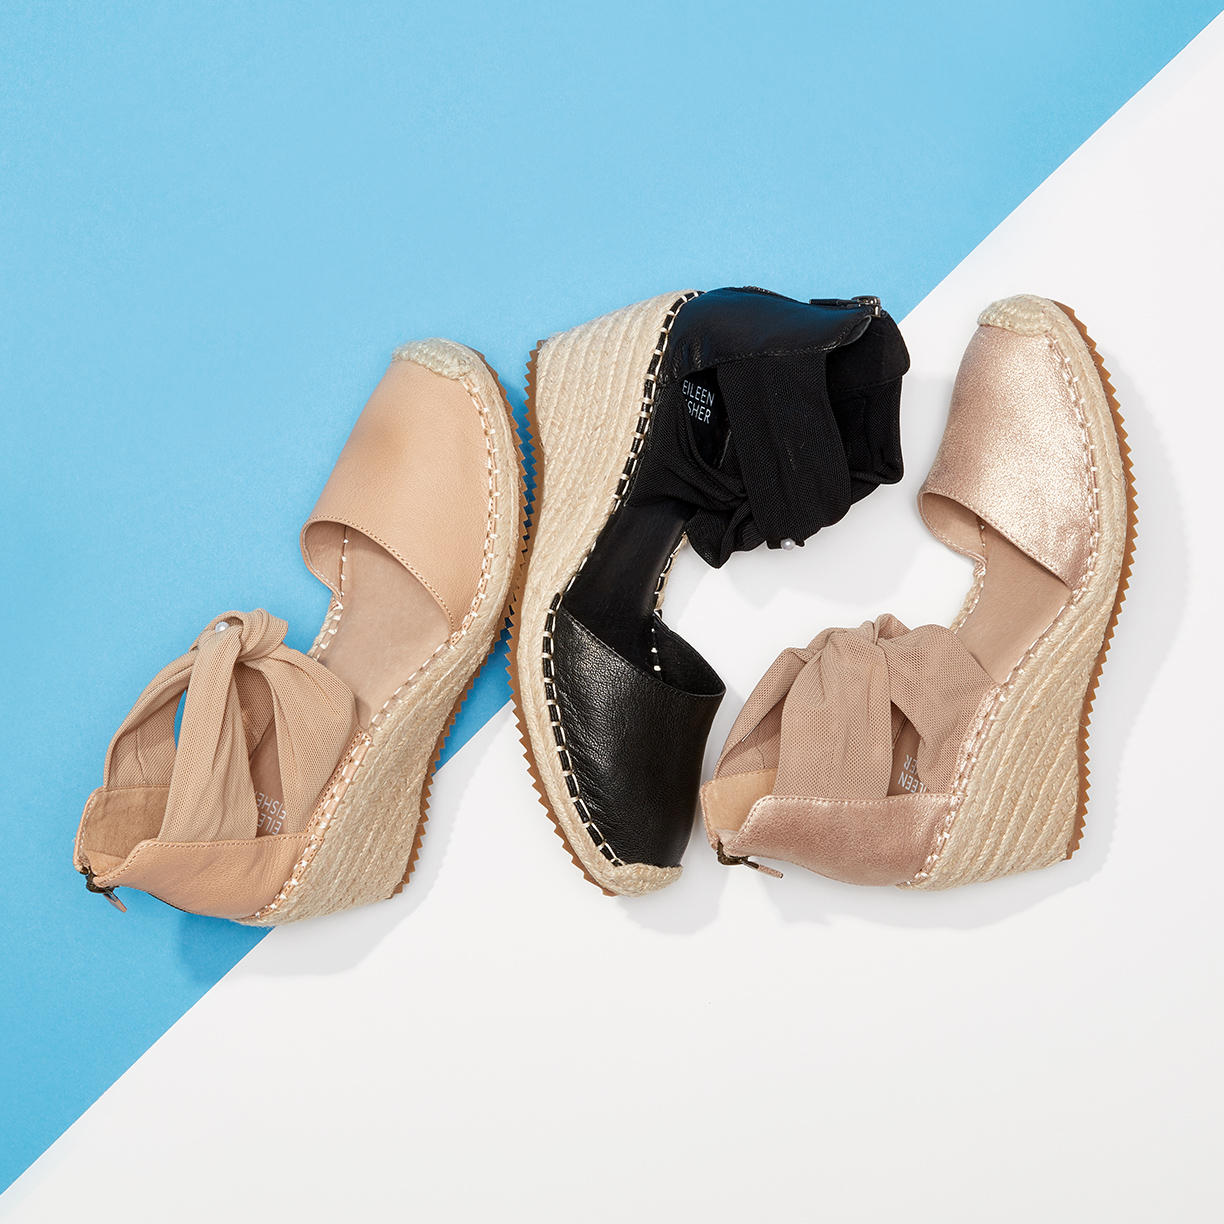 Modern Shoes Up to 50% Off Feat. Eileen Fisher